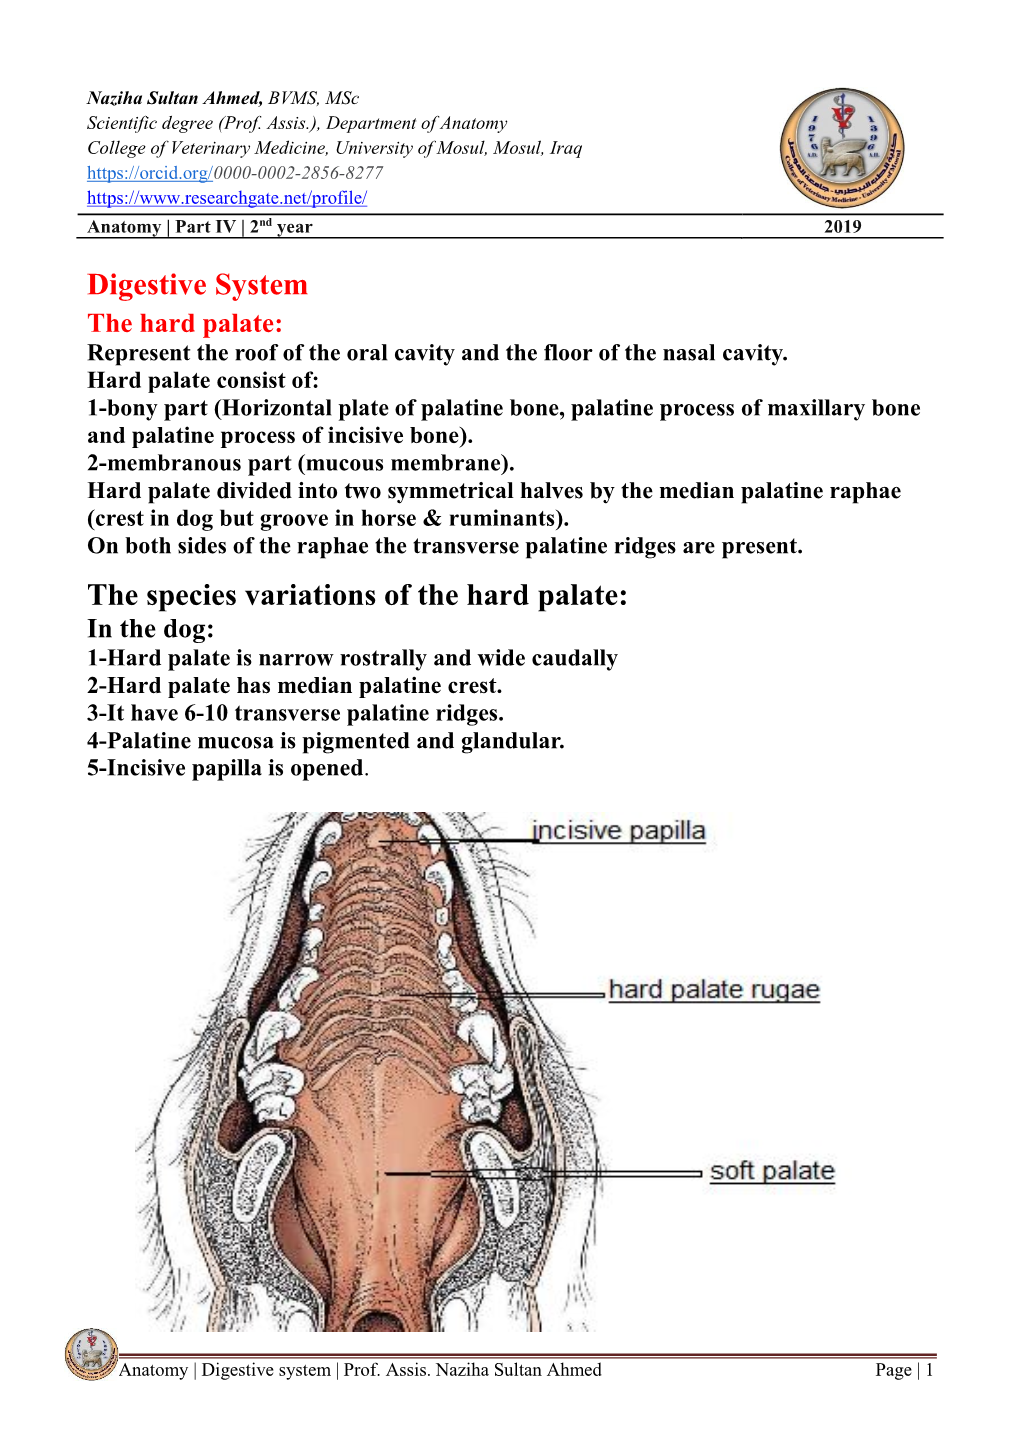 Digestive System the Species Variations of the Hard Palate